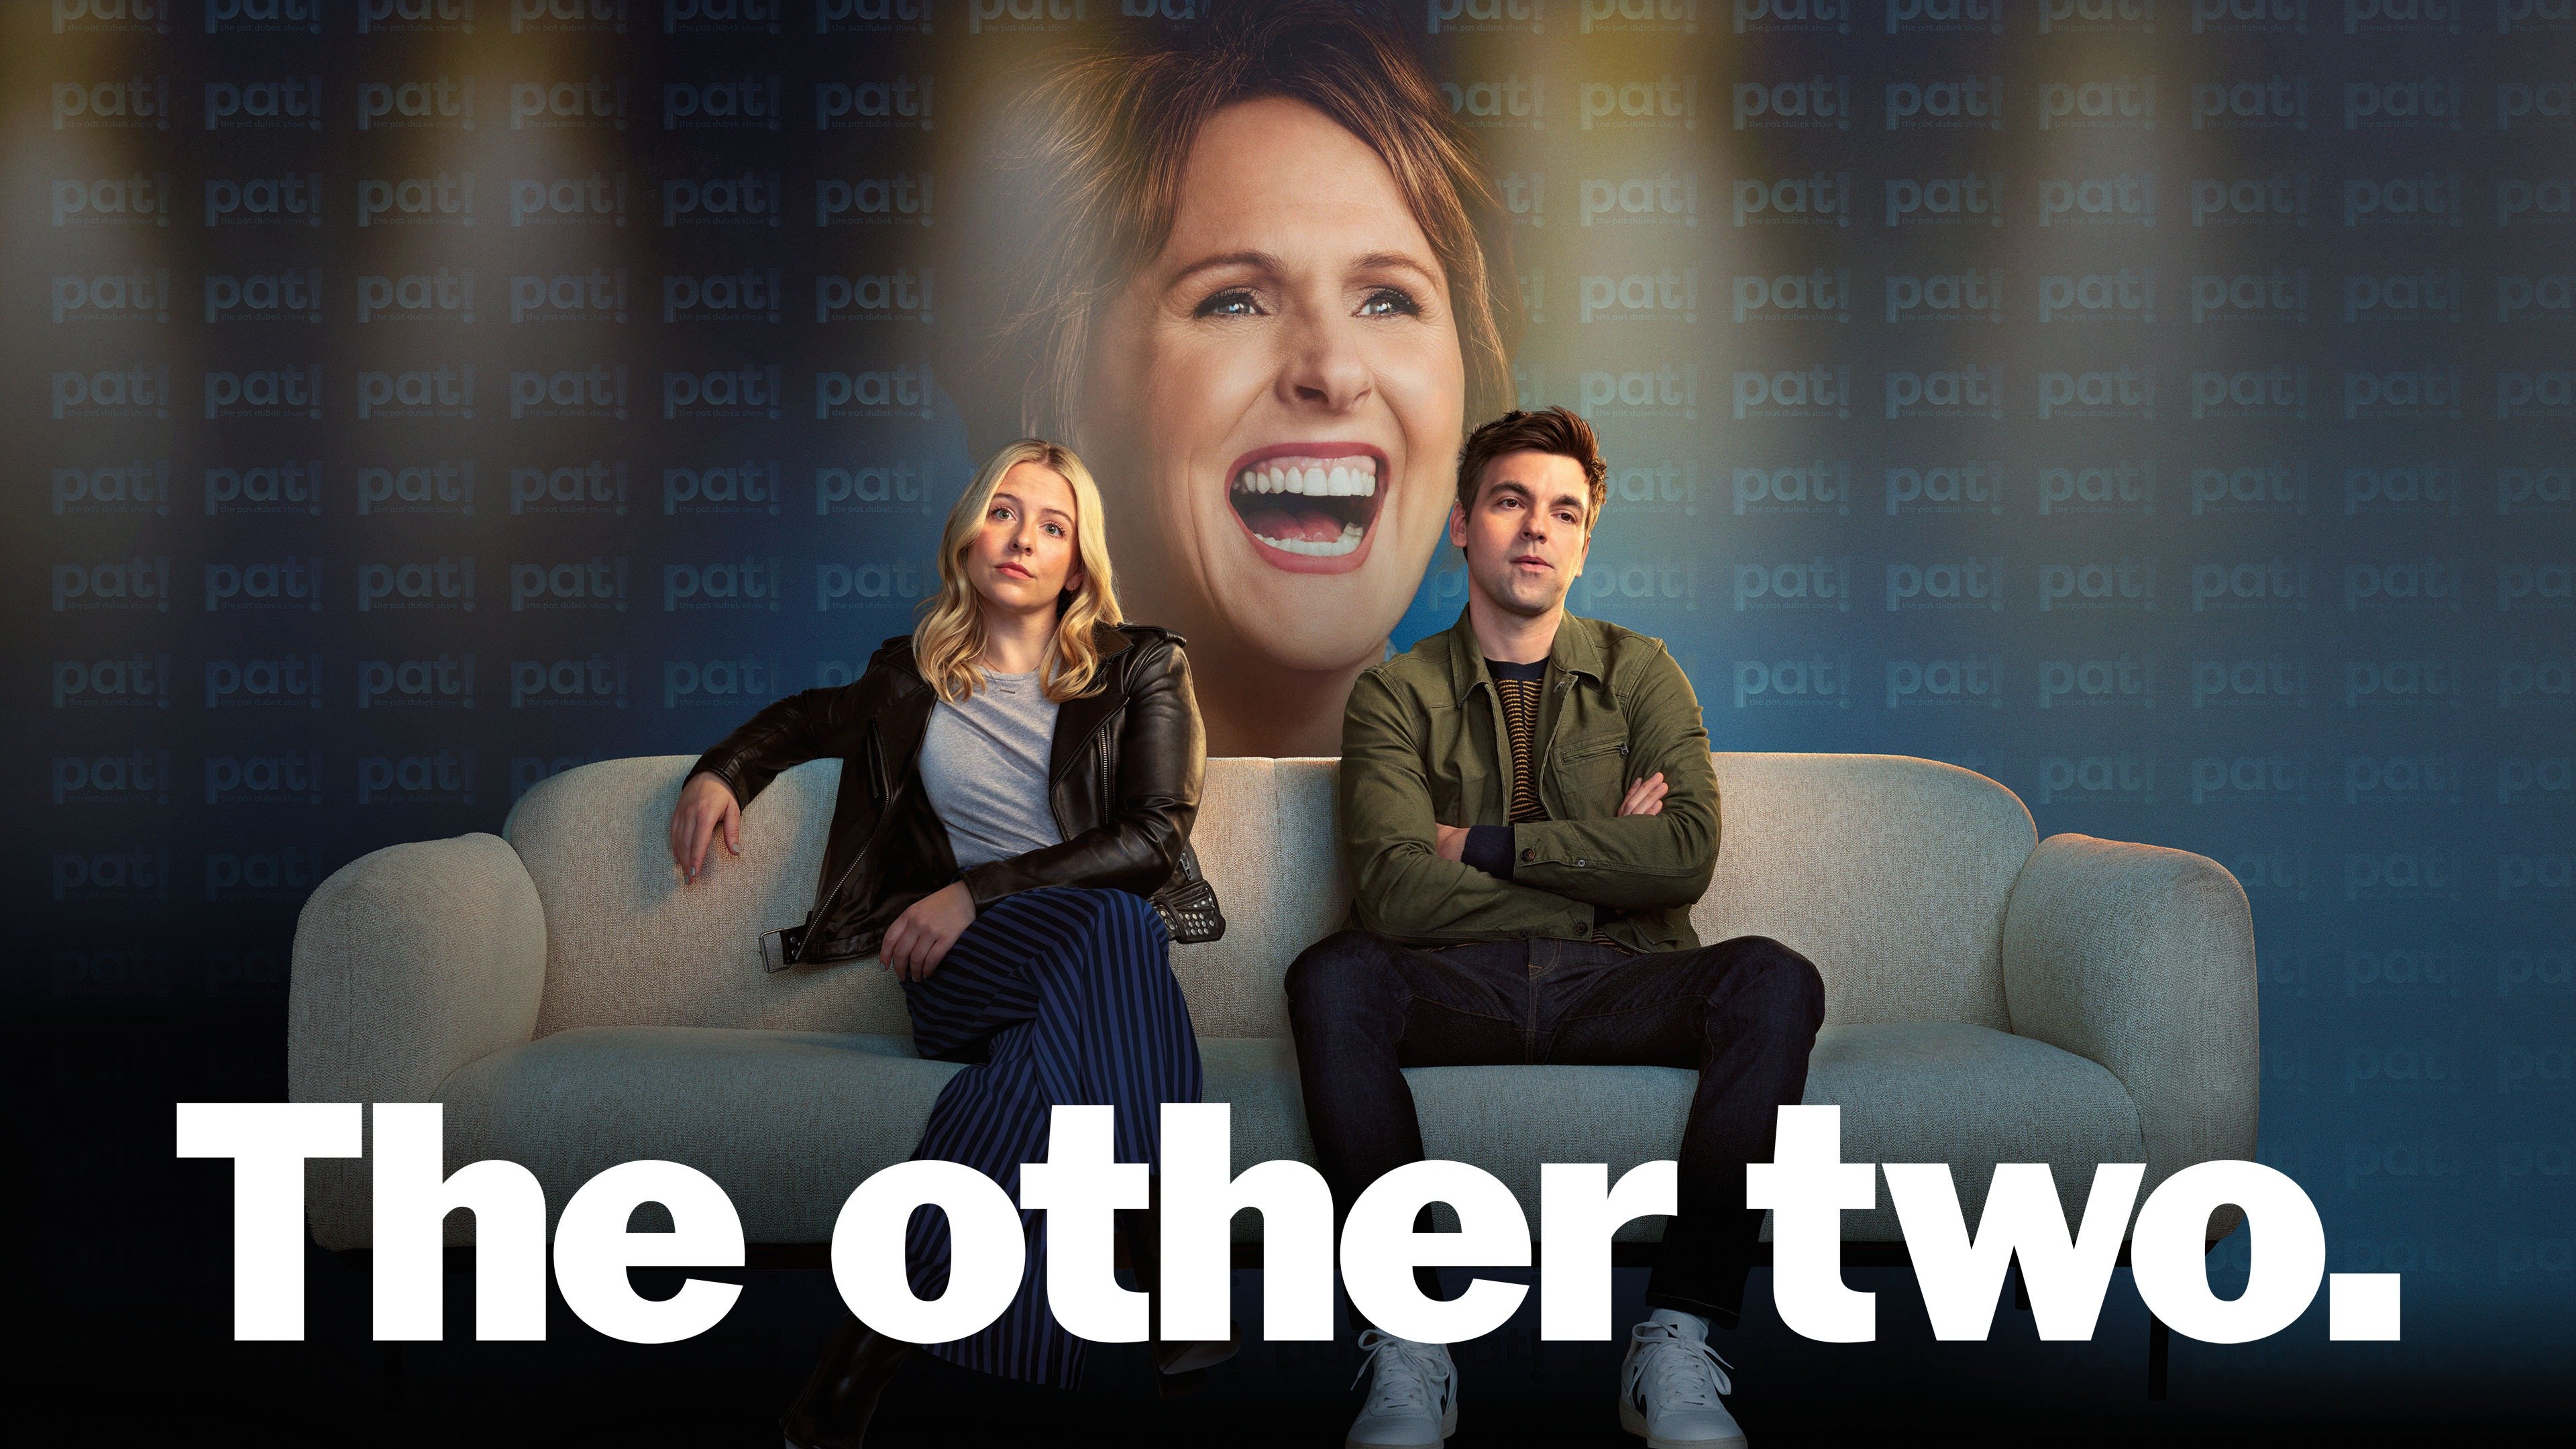 "The Other Two: Season 2 photo 4"